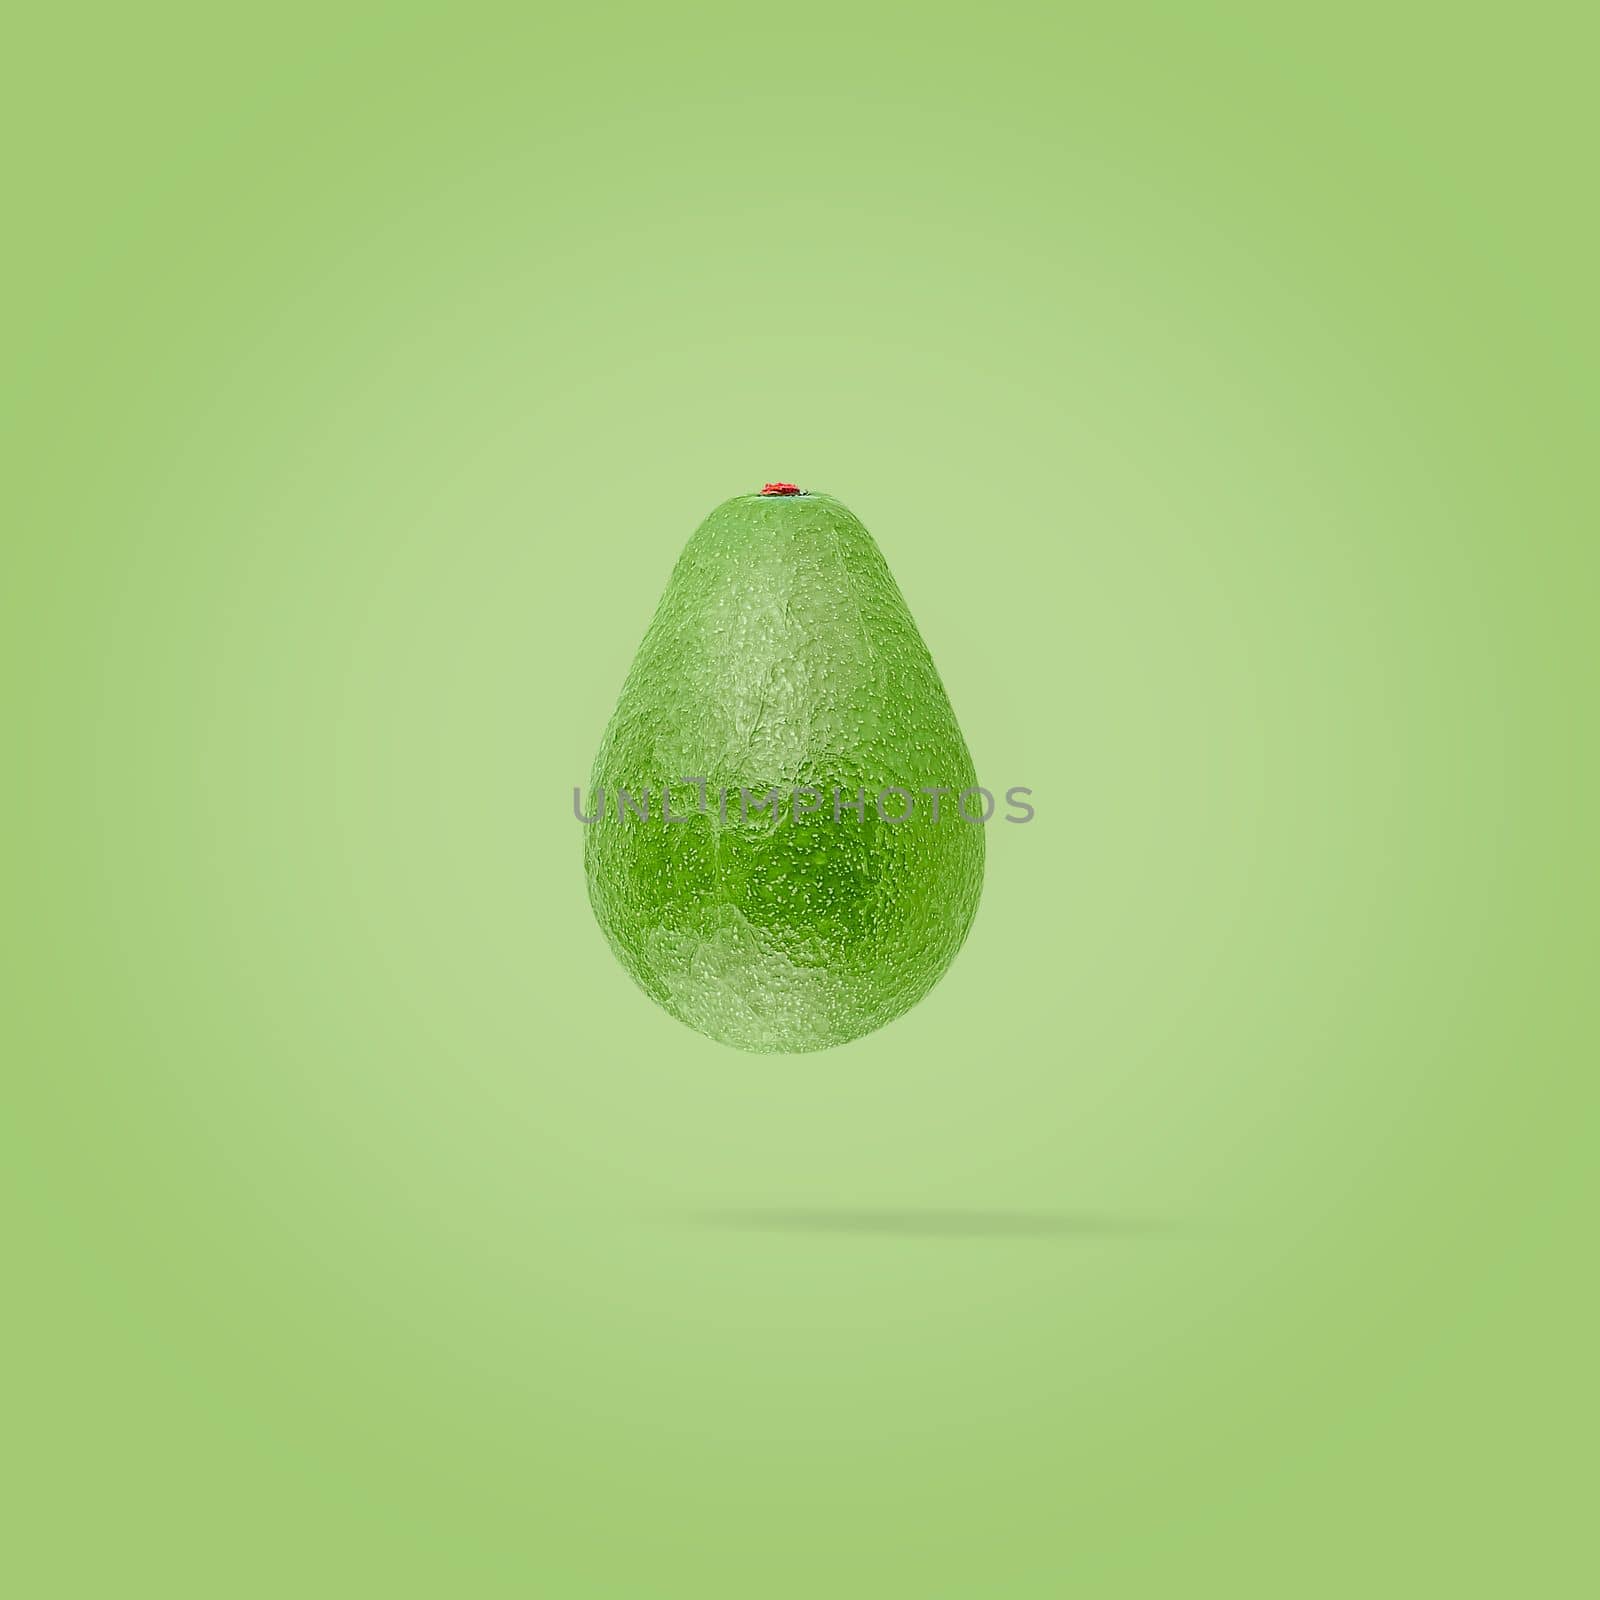 Avocado on creative colored background with clipping path as package design element by Ciorba